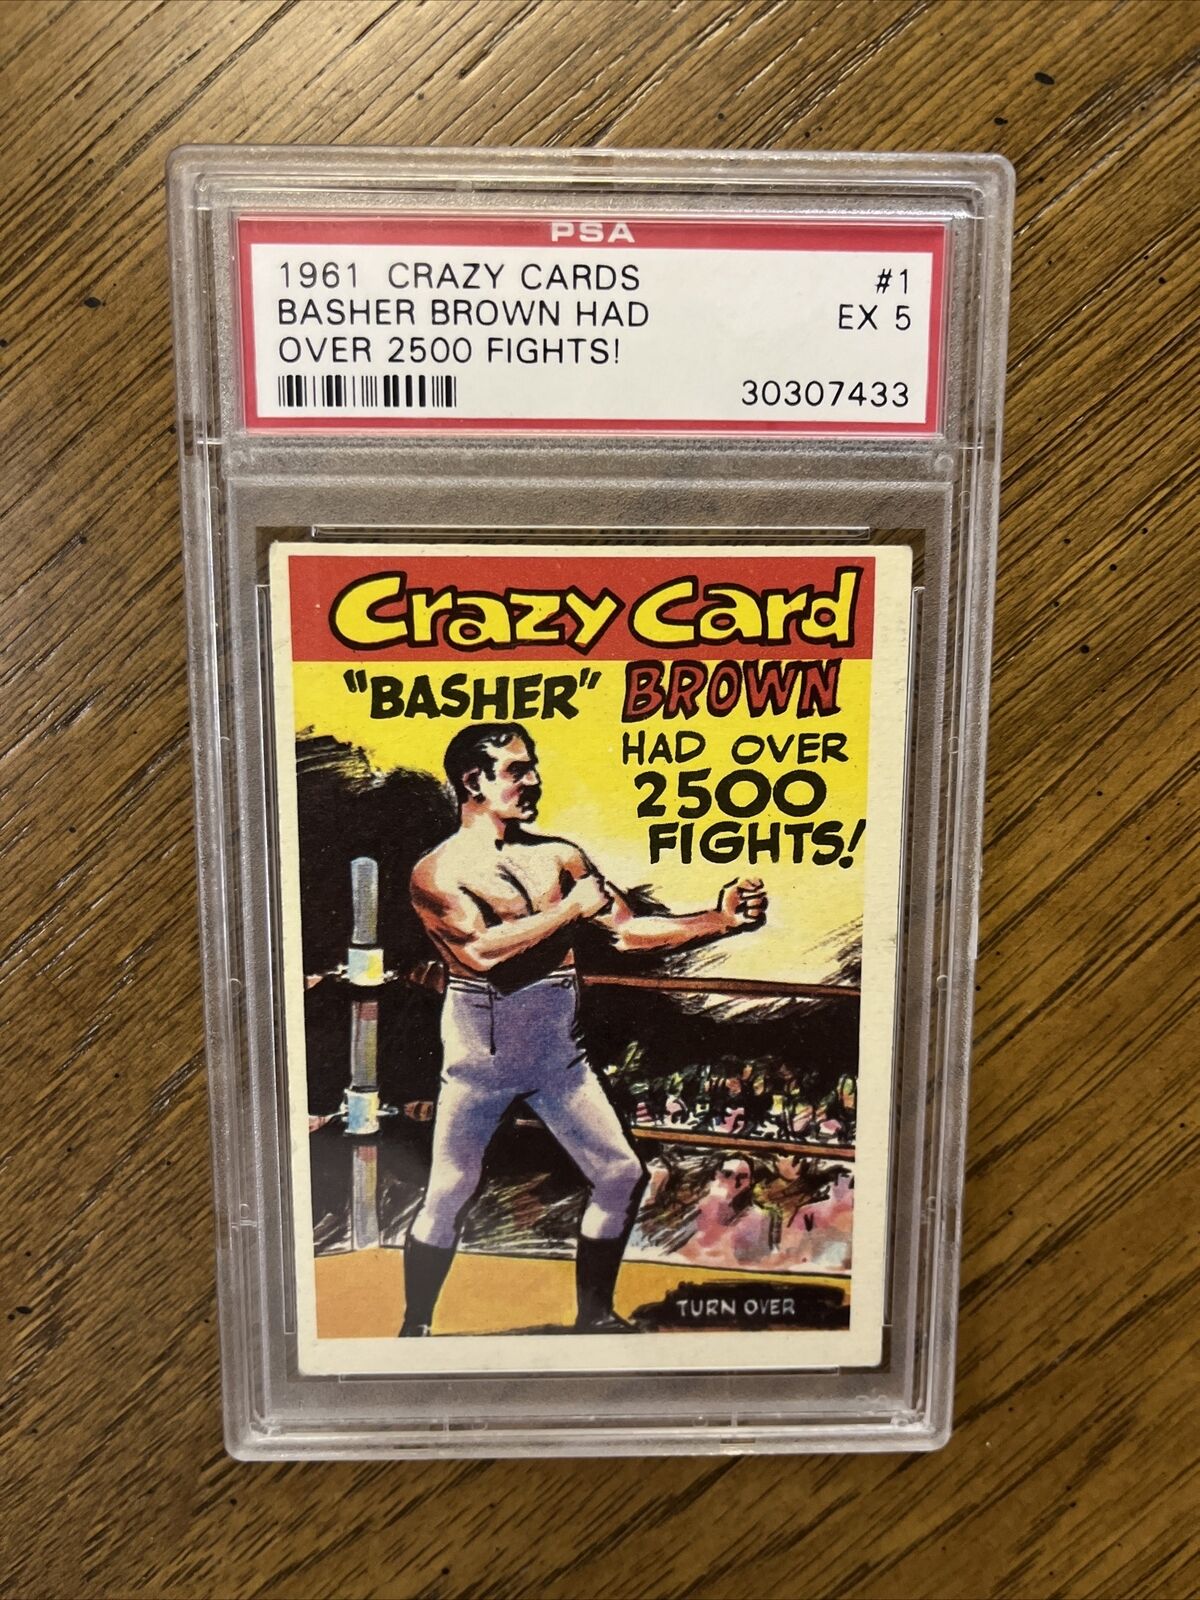 1961 Topps CRAZY CARDS #1 Basher Brown had Over 2500 Fights PSA 5